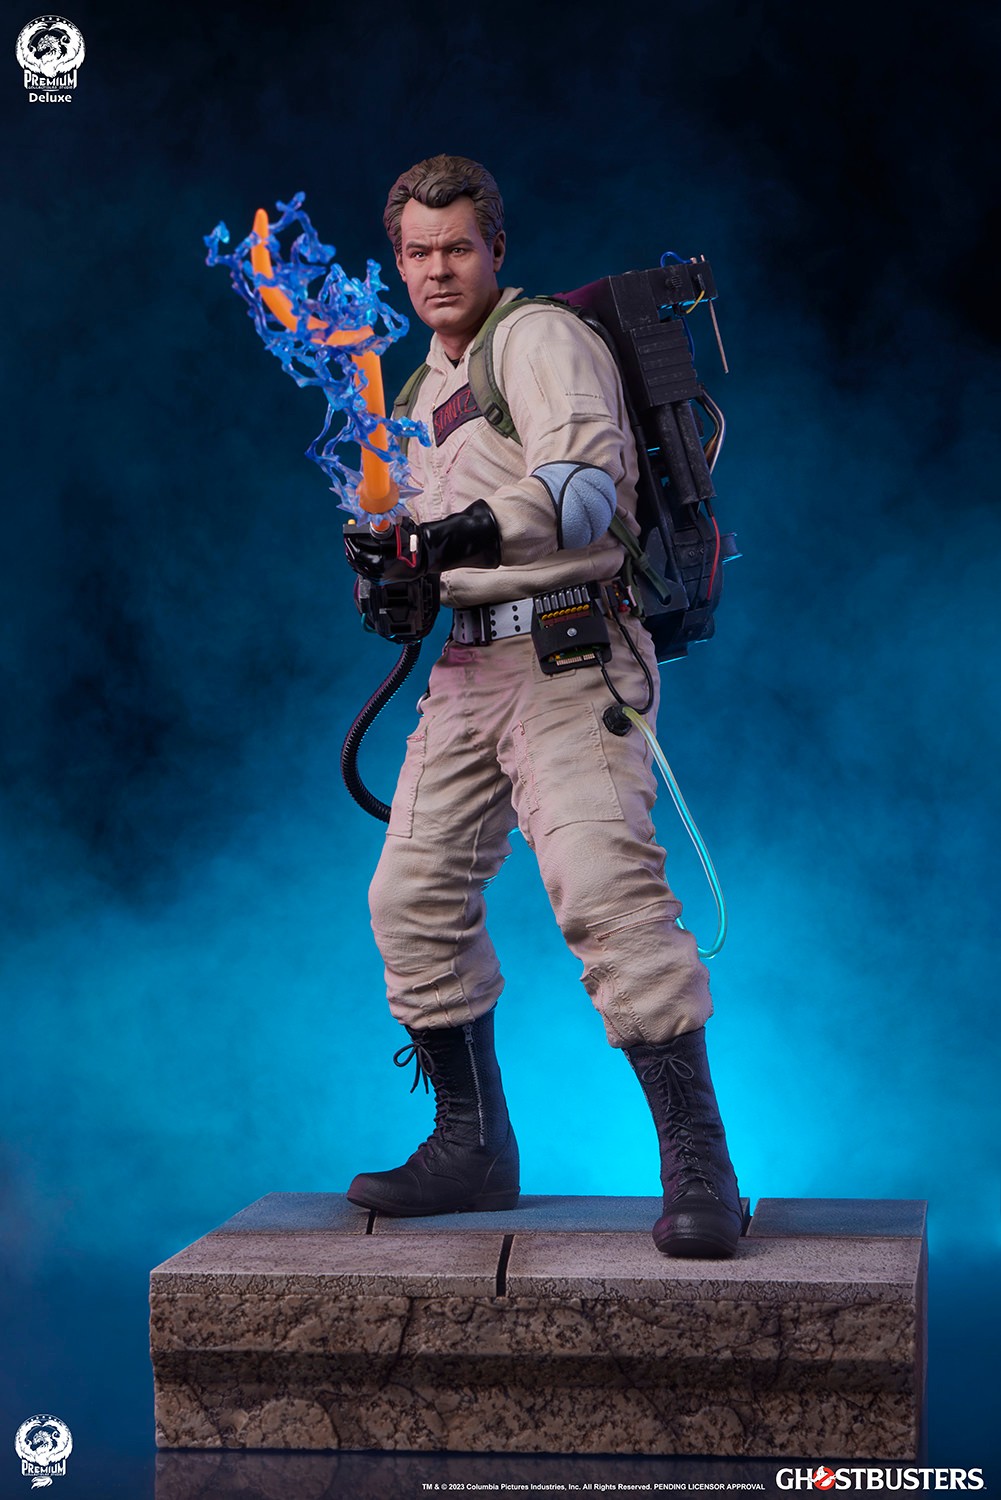 Ghostbusters: Ray (Deluxe Version) (Prototype Shown) View 1